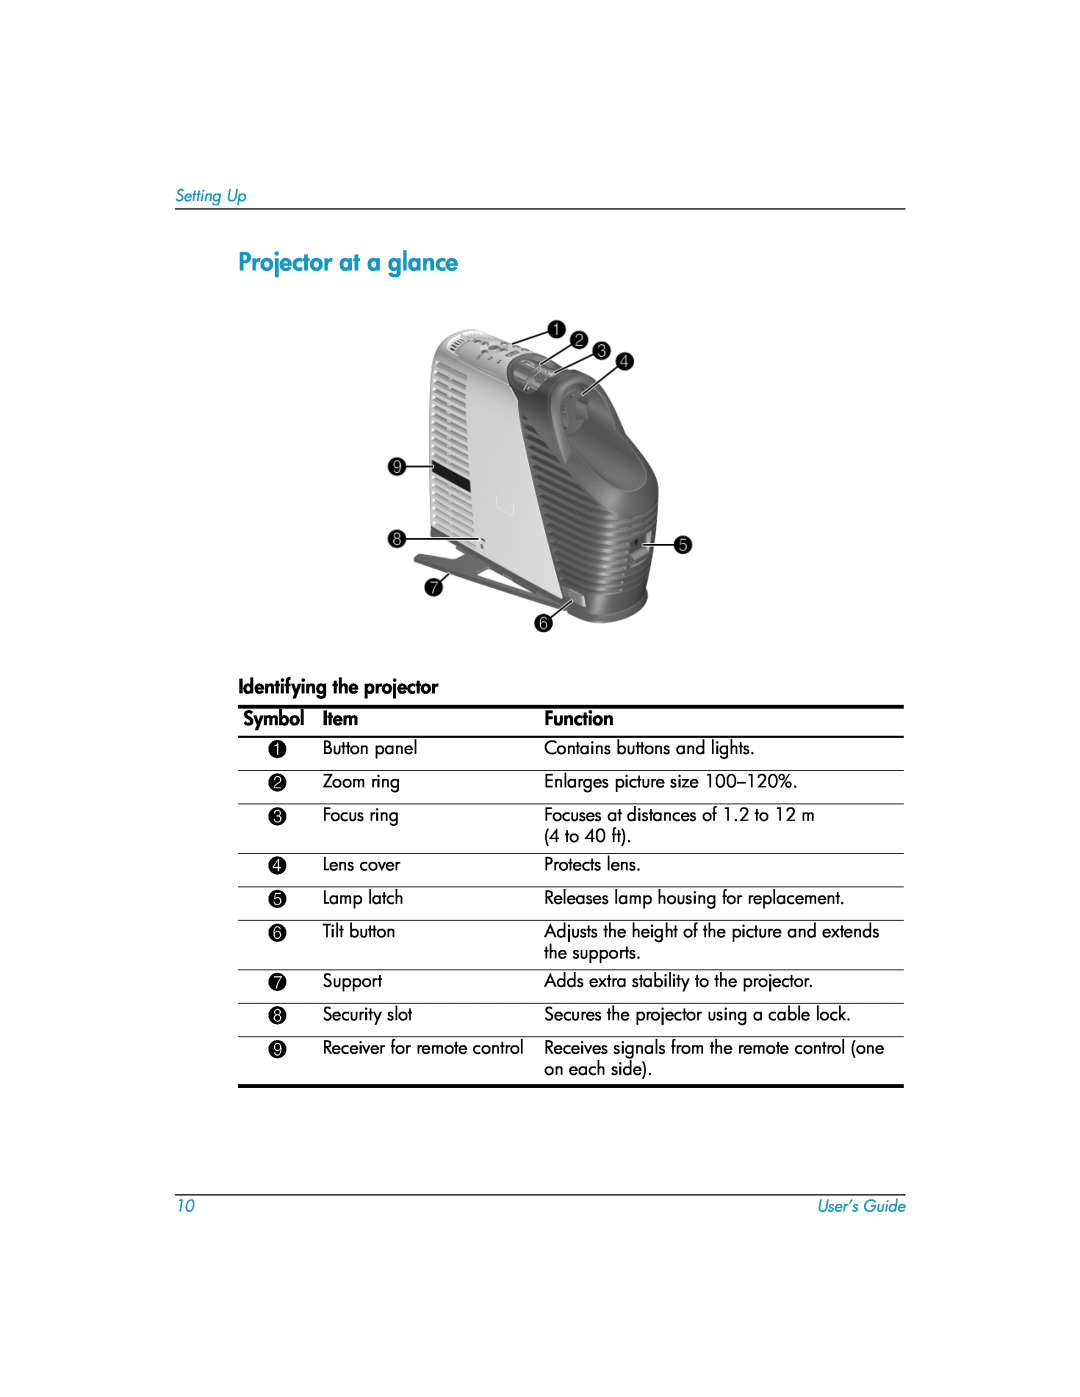 HP mp3135w manual Projector at a glance, Identifying the projector, Symbol, Function 